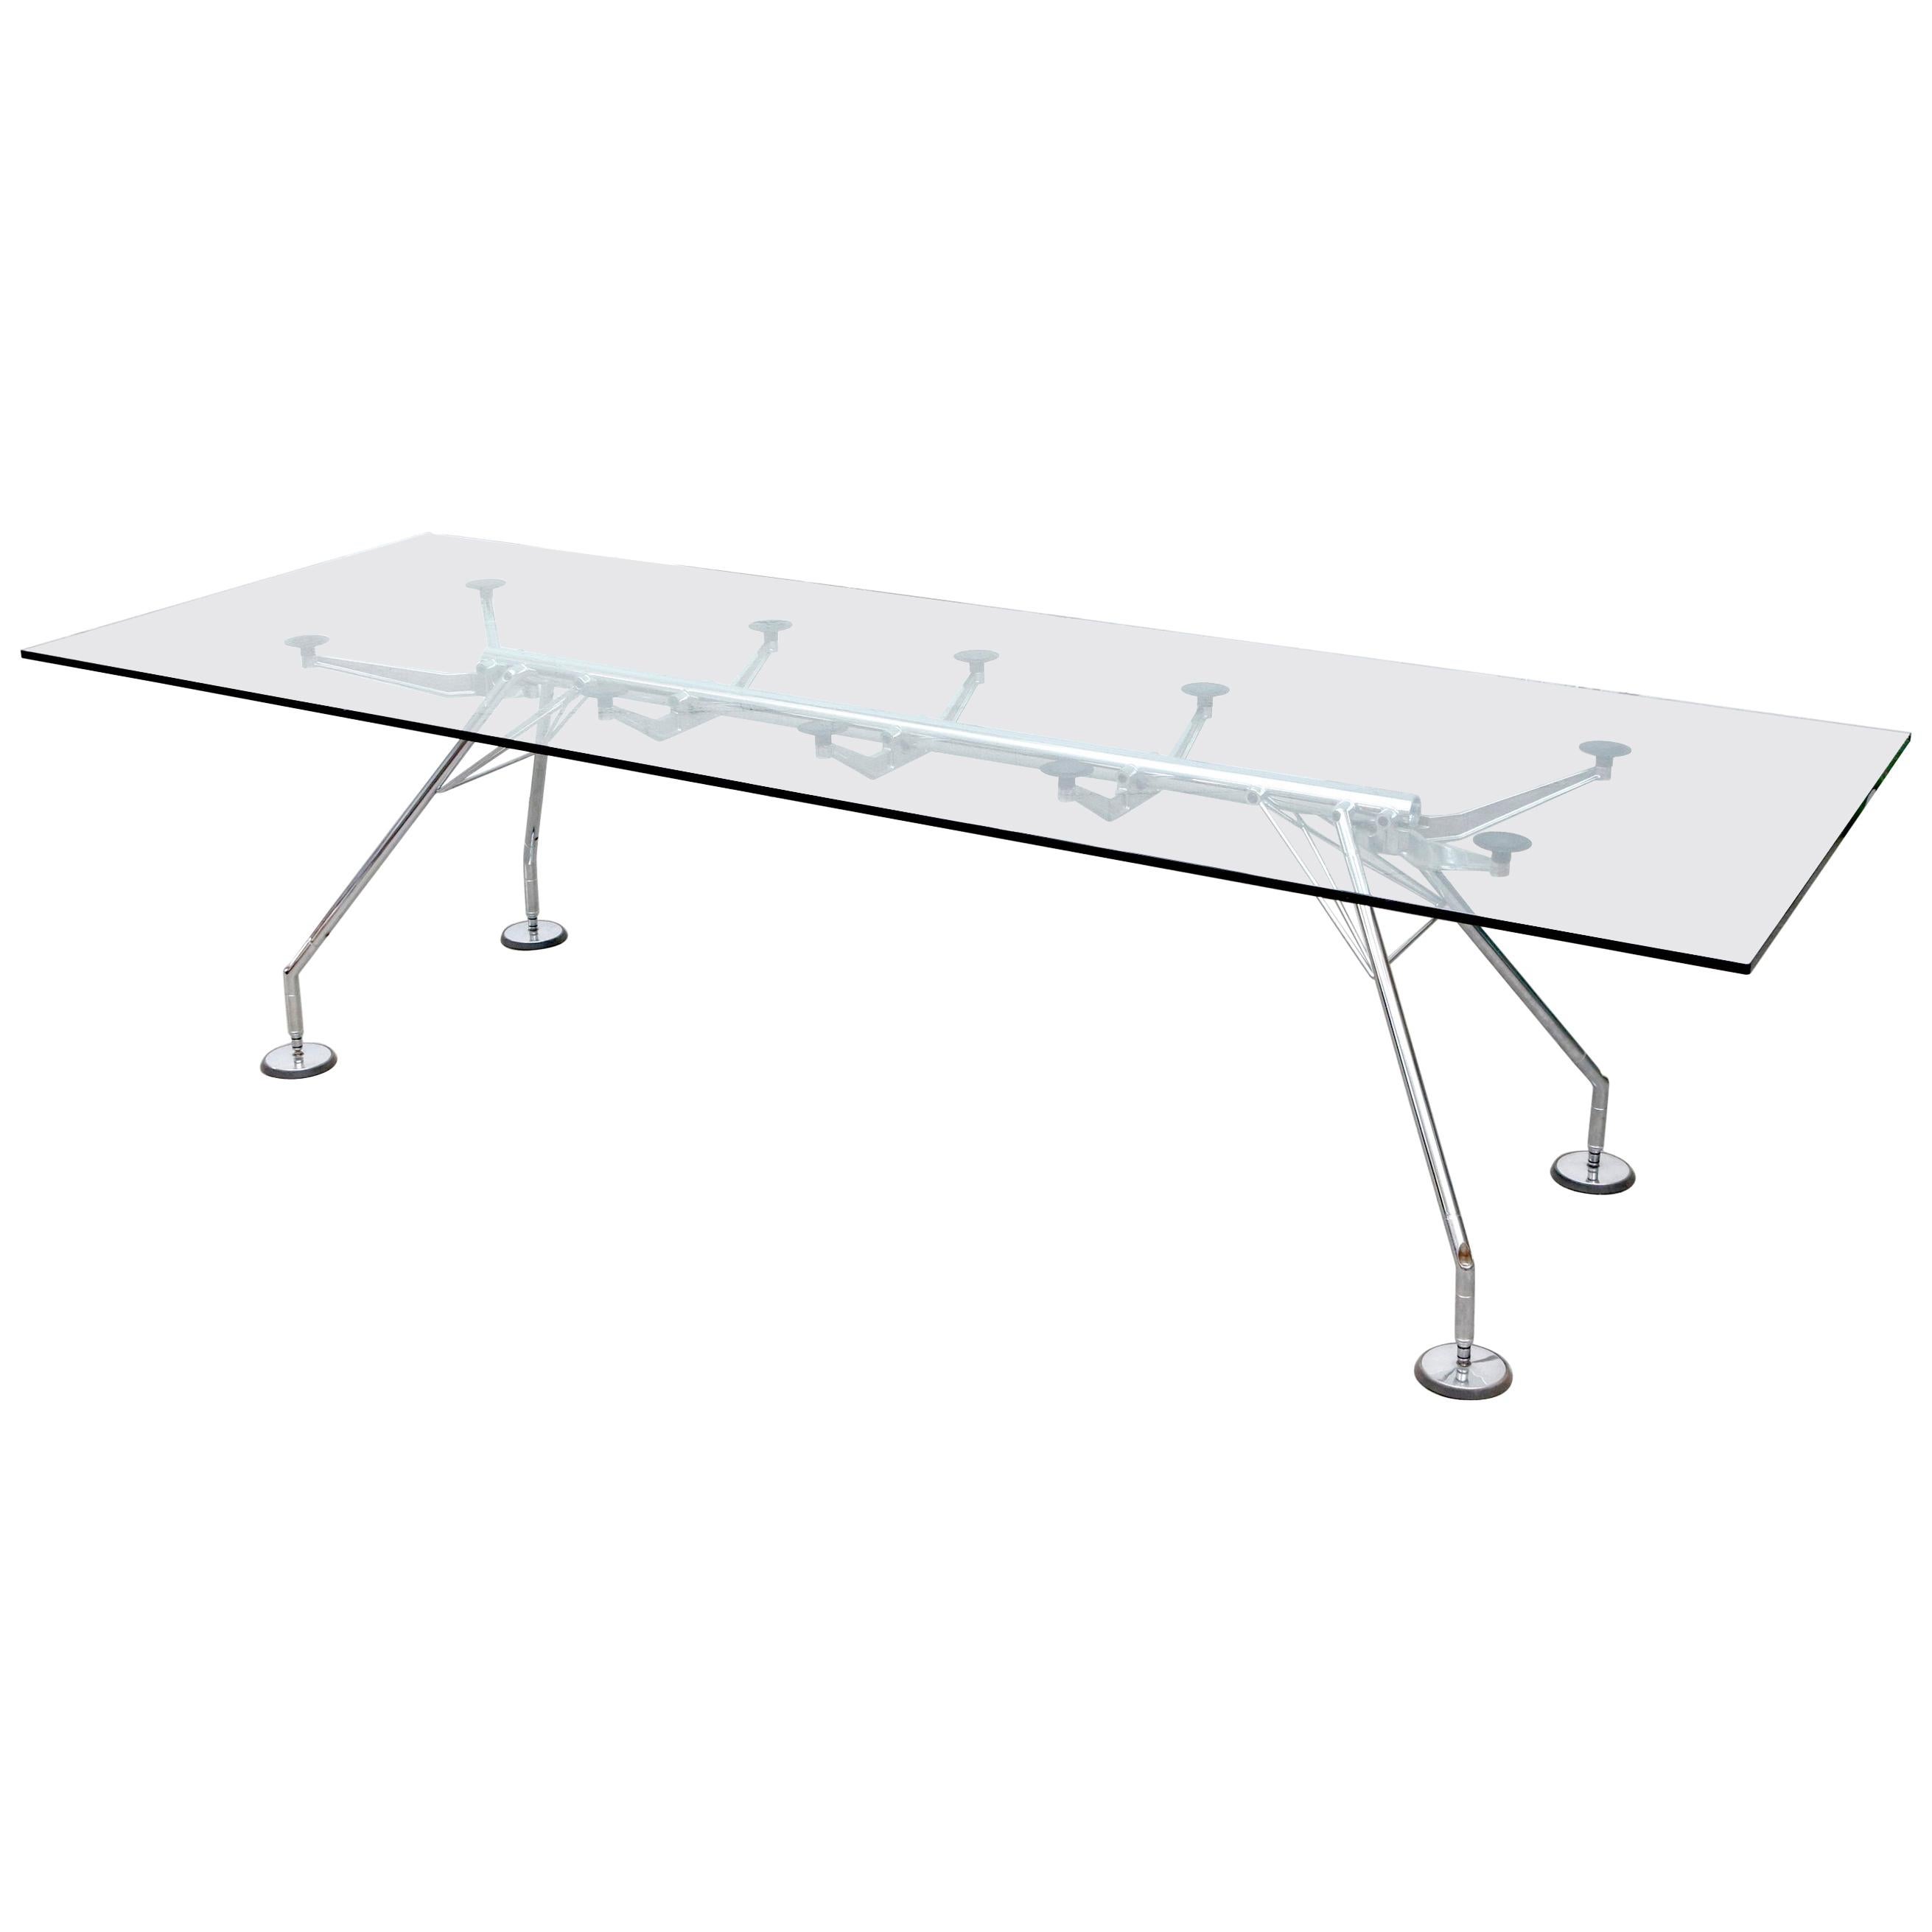 Norman Foster for Tecno "Nomos" Clear Glass Table with Chrome Legs